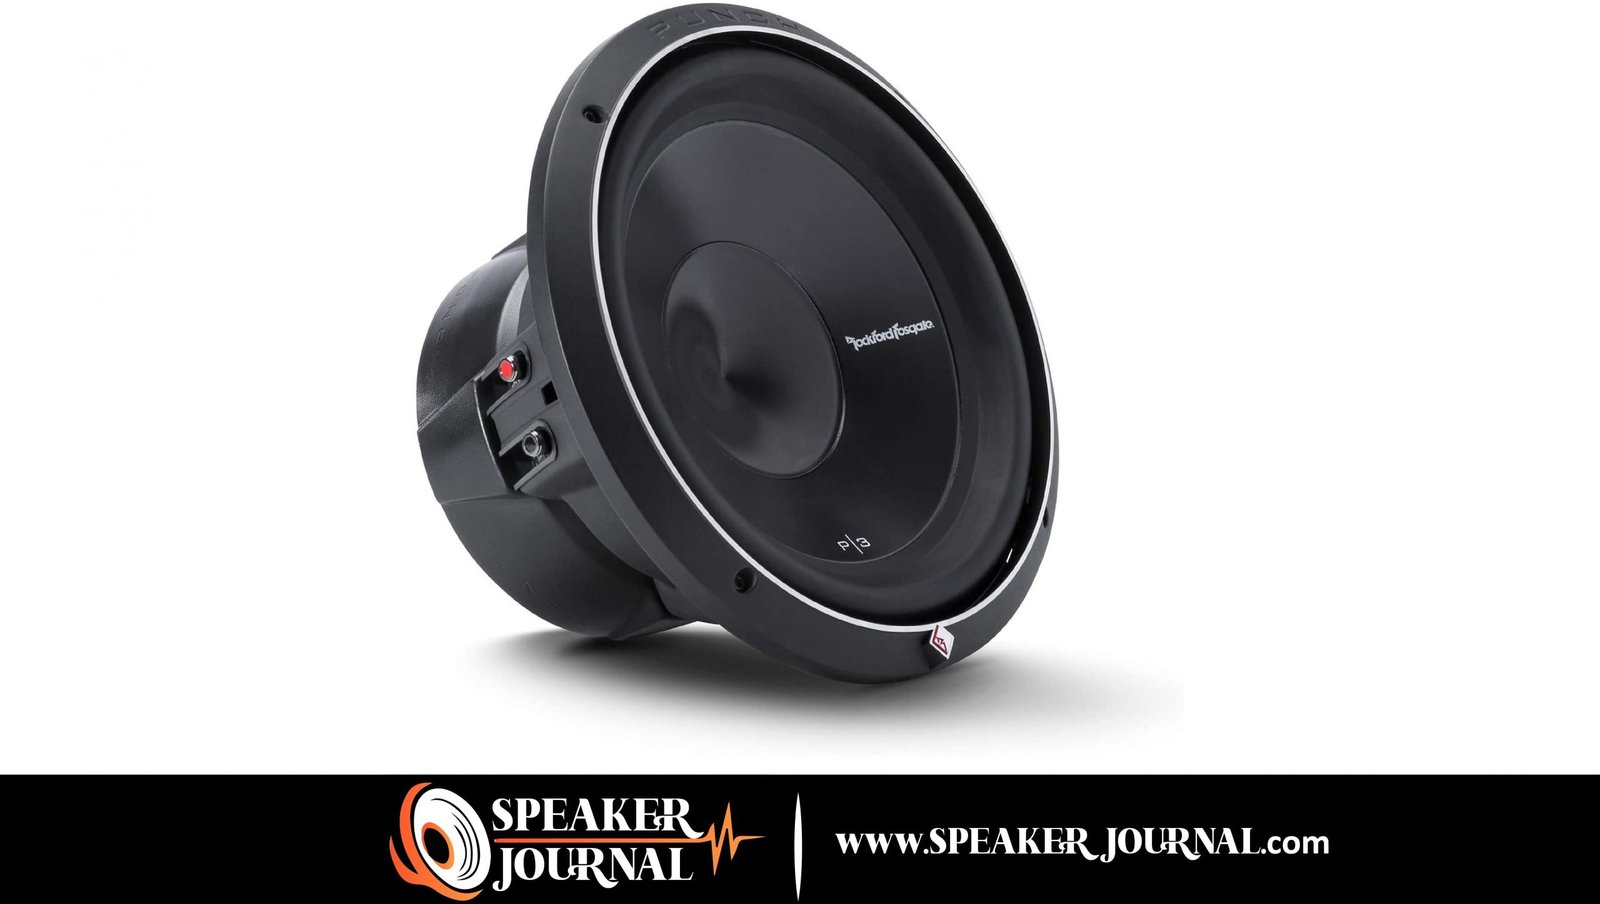 How does a subwoofer work by speakerjournal.com